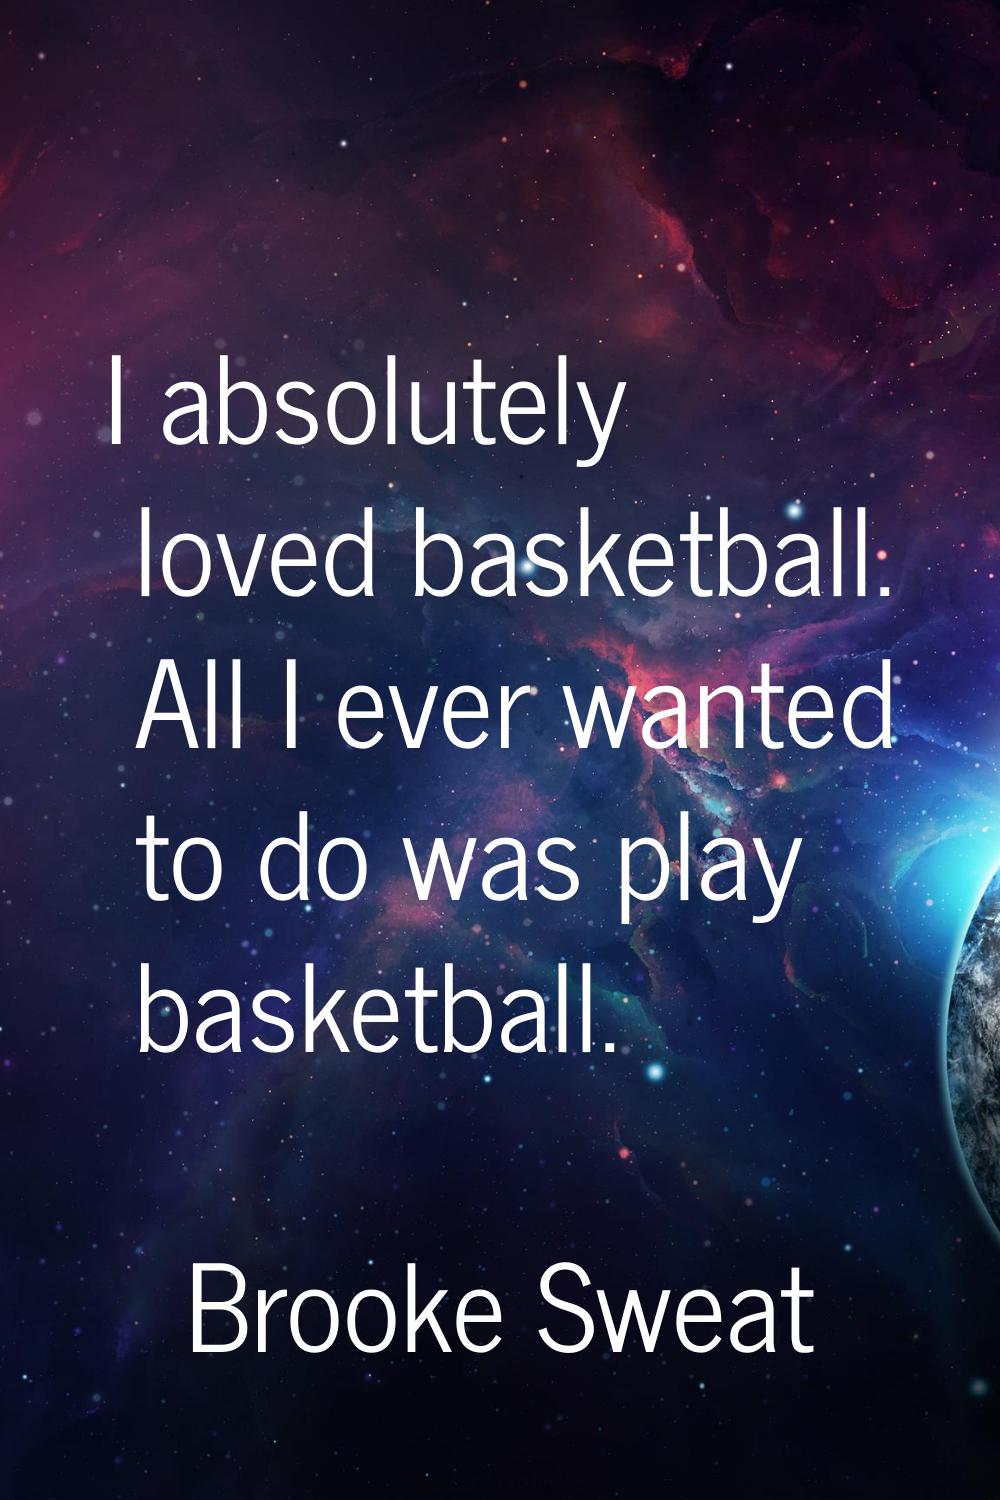 I absolutely loved basketball. All I ever wanted to do was play basketball.